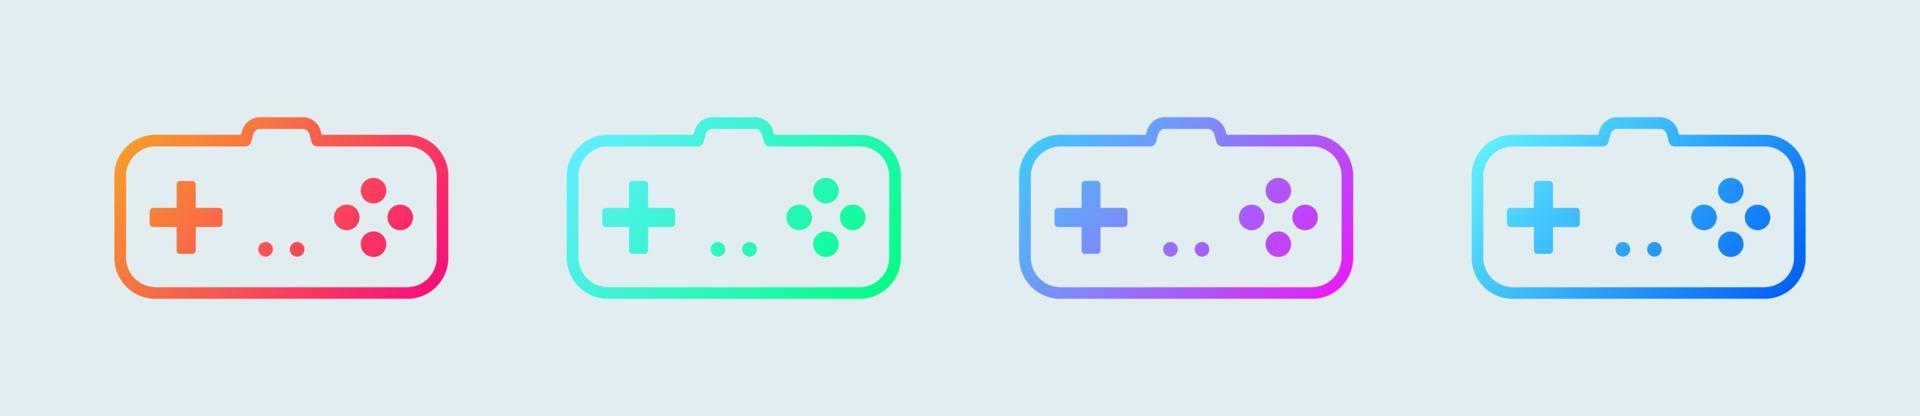 Joystick line icon in gradient colors. Game console sign vector illustration.